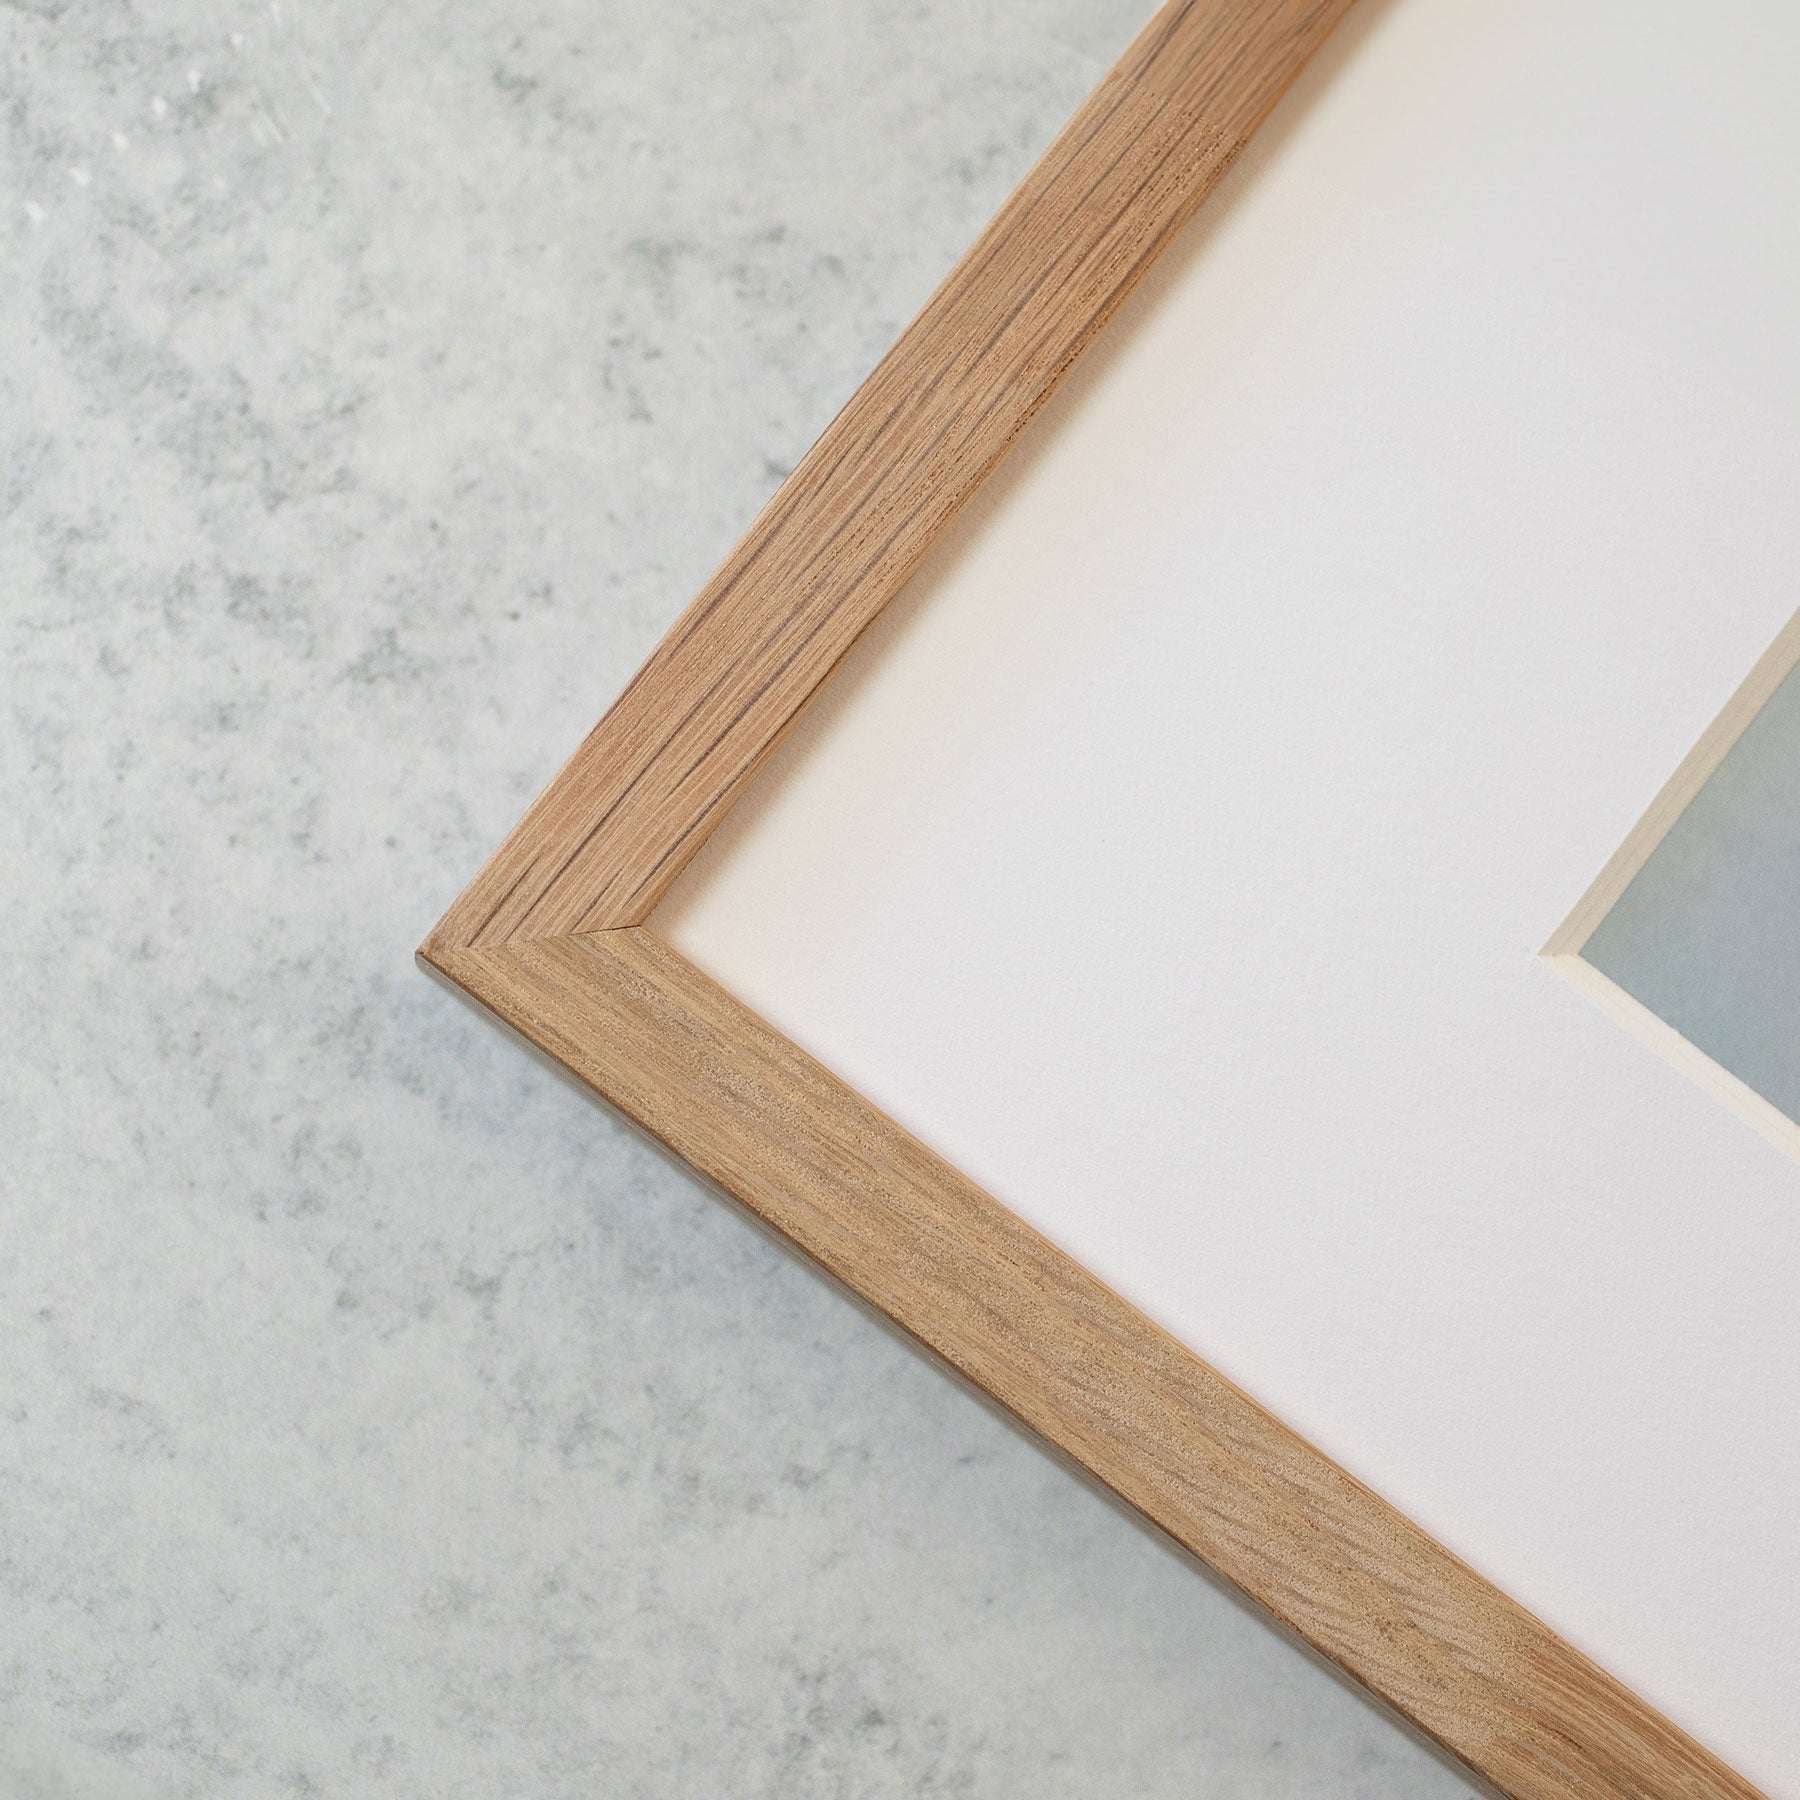 Close-up of a wooden picture frame corner against a light, textured surface. The natural wood finish complements the white mat, which has a section in the middle slightly visible. Showcasing the craftsmanship, it's ideal for highlighting coastal wall art like Offley Green's 'The Lighthouse' Nautical Print.